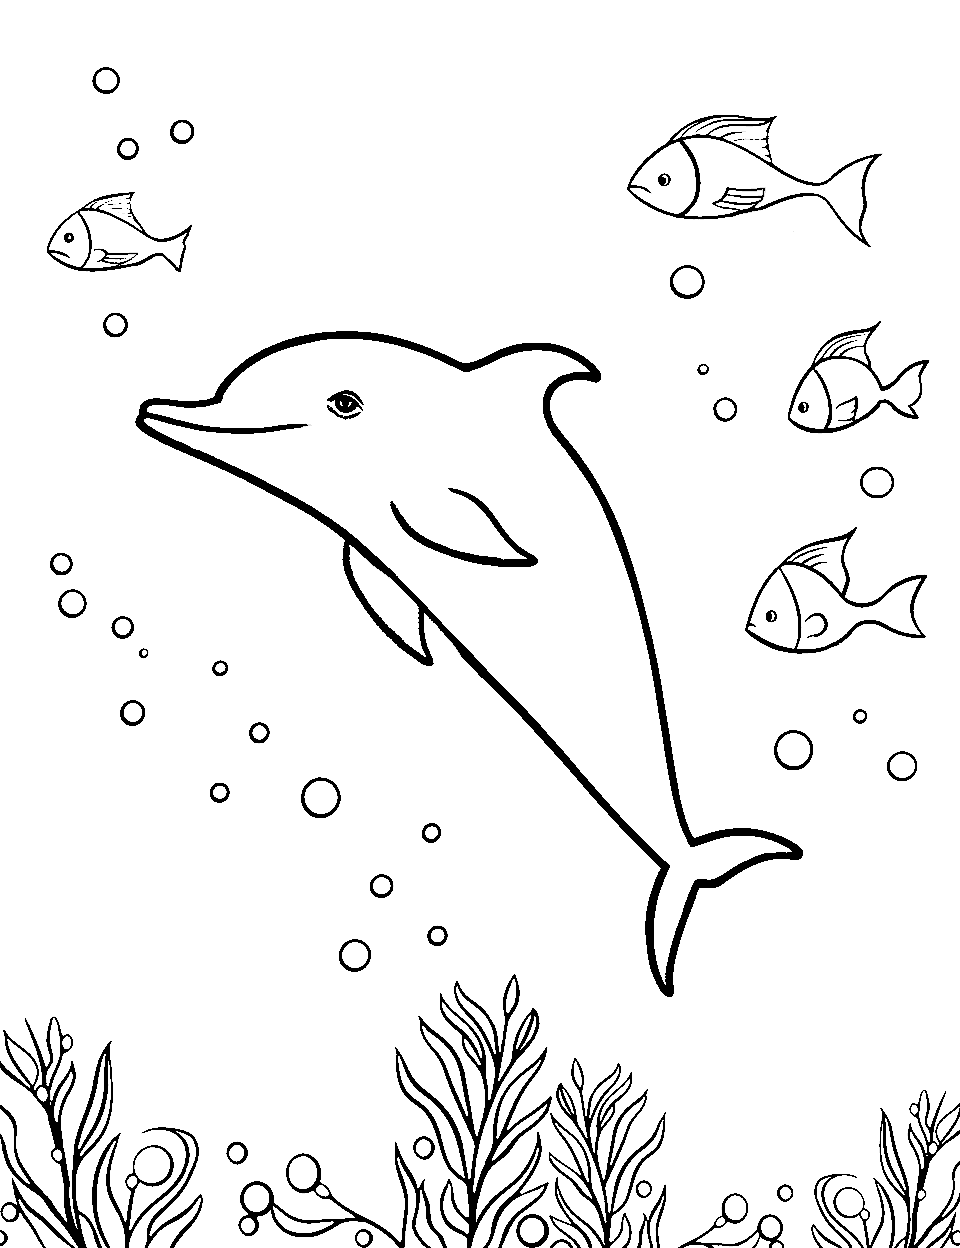 Dolphin and Tropical Fish Coloring Page - A dolphin gently interacting with a school of simplistic, colorful tropical fish.